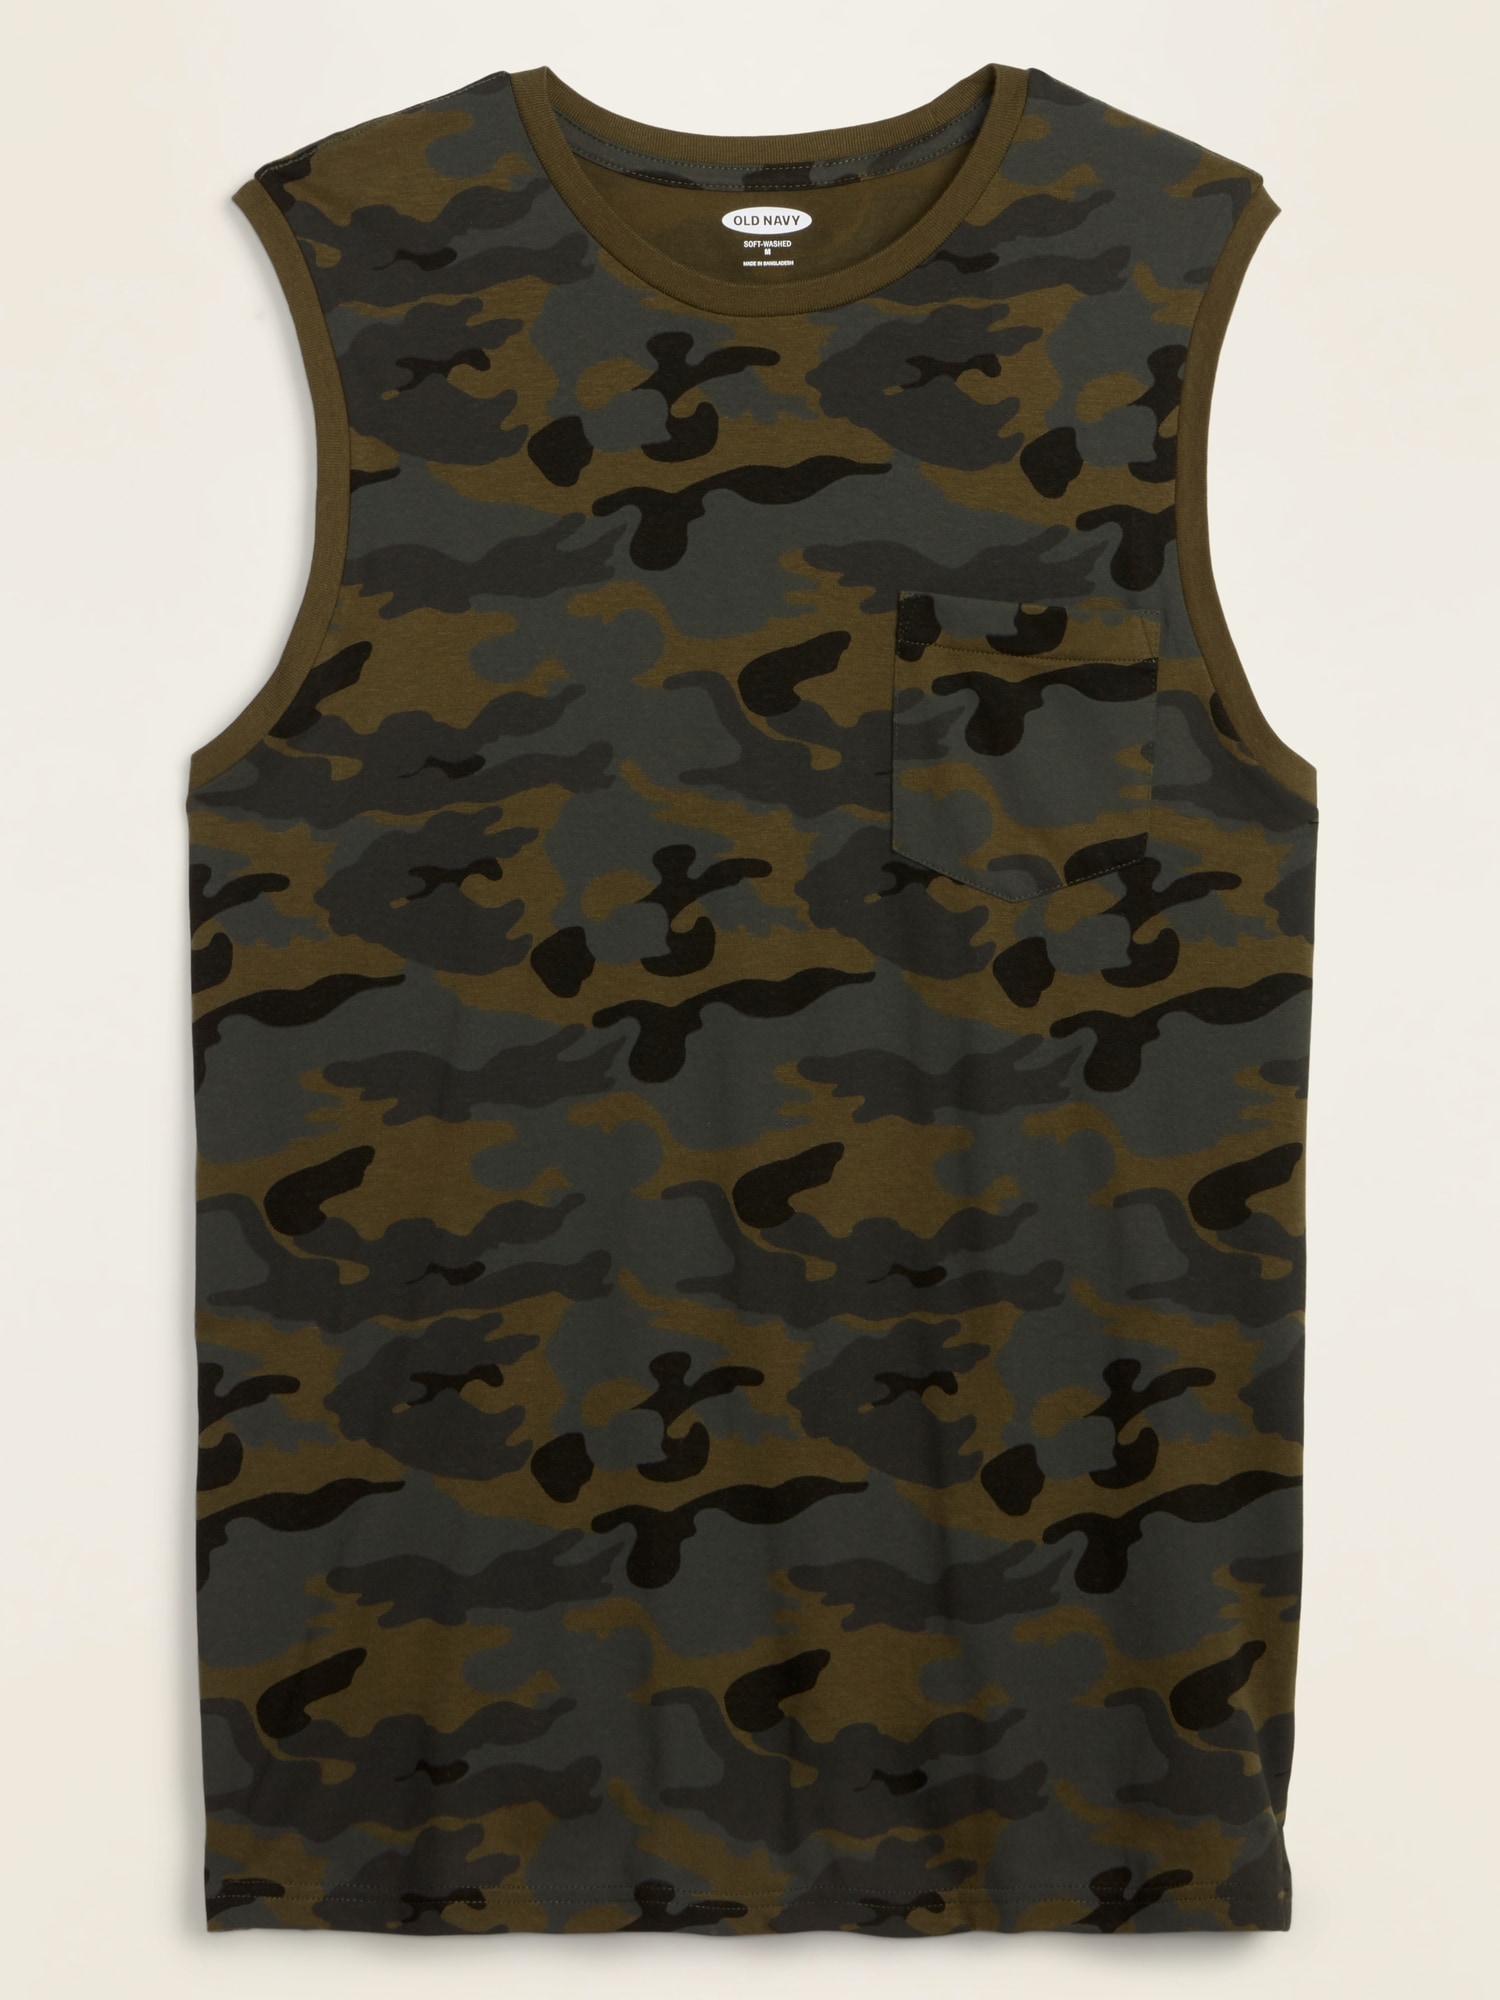 Soft-Washed Chest-Pocket Camo Muscle Shirt for Men